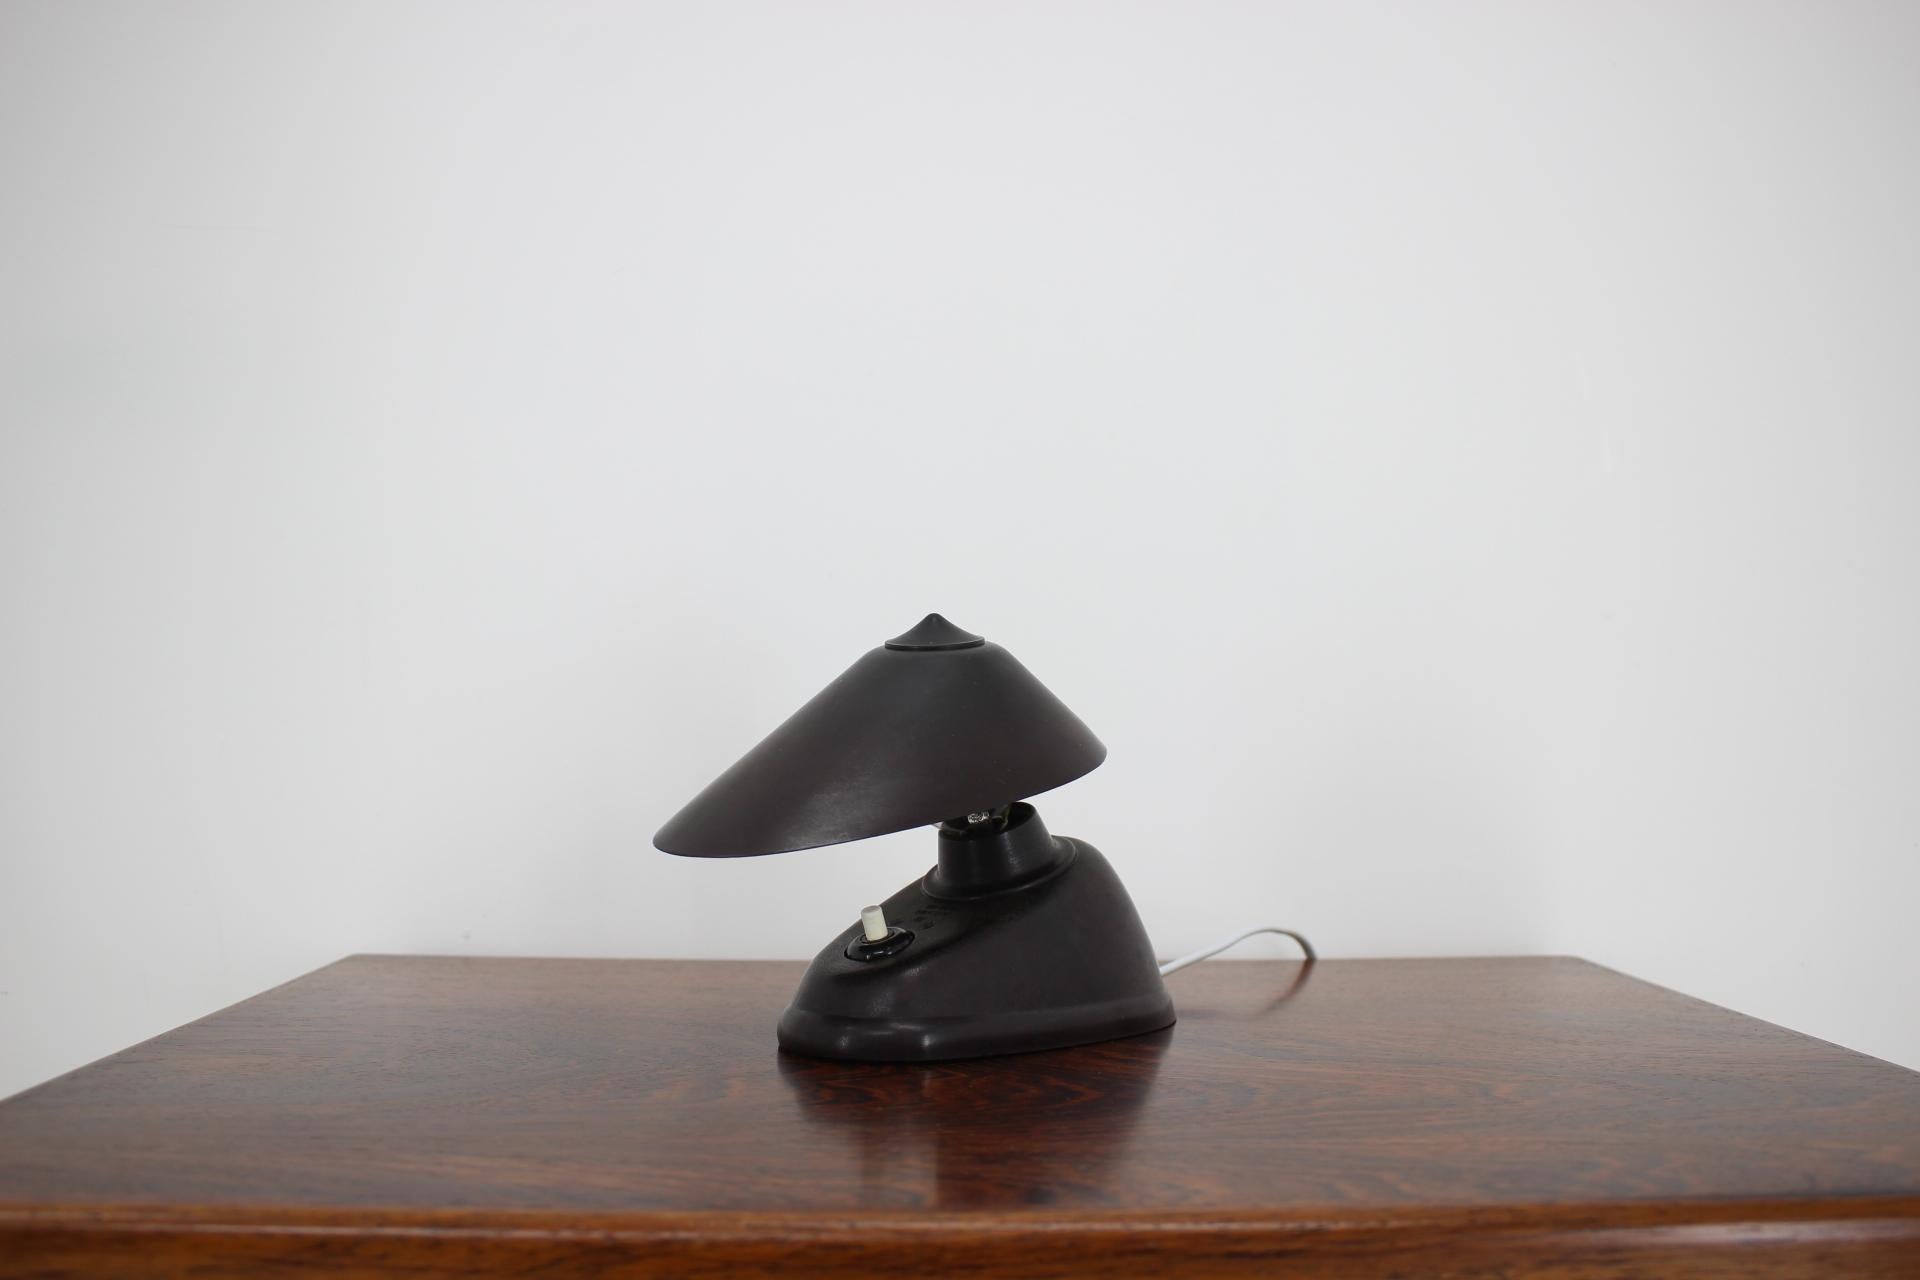 - Made in Czechoslovakia
- Made of bakelite
- Adjustable lamp shade
- Re-polished
- Fully functional
- Good, original condition.